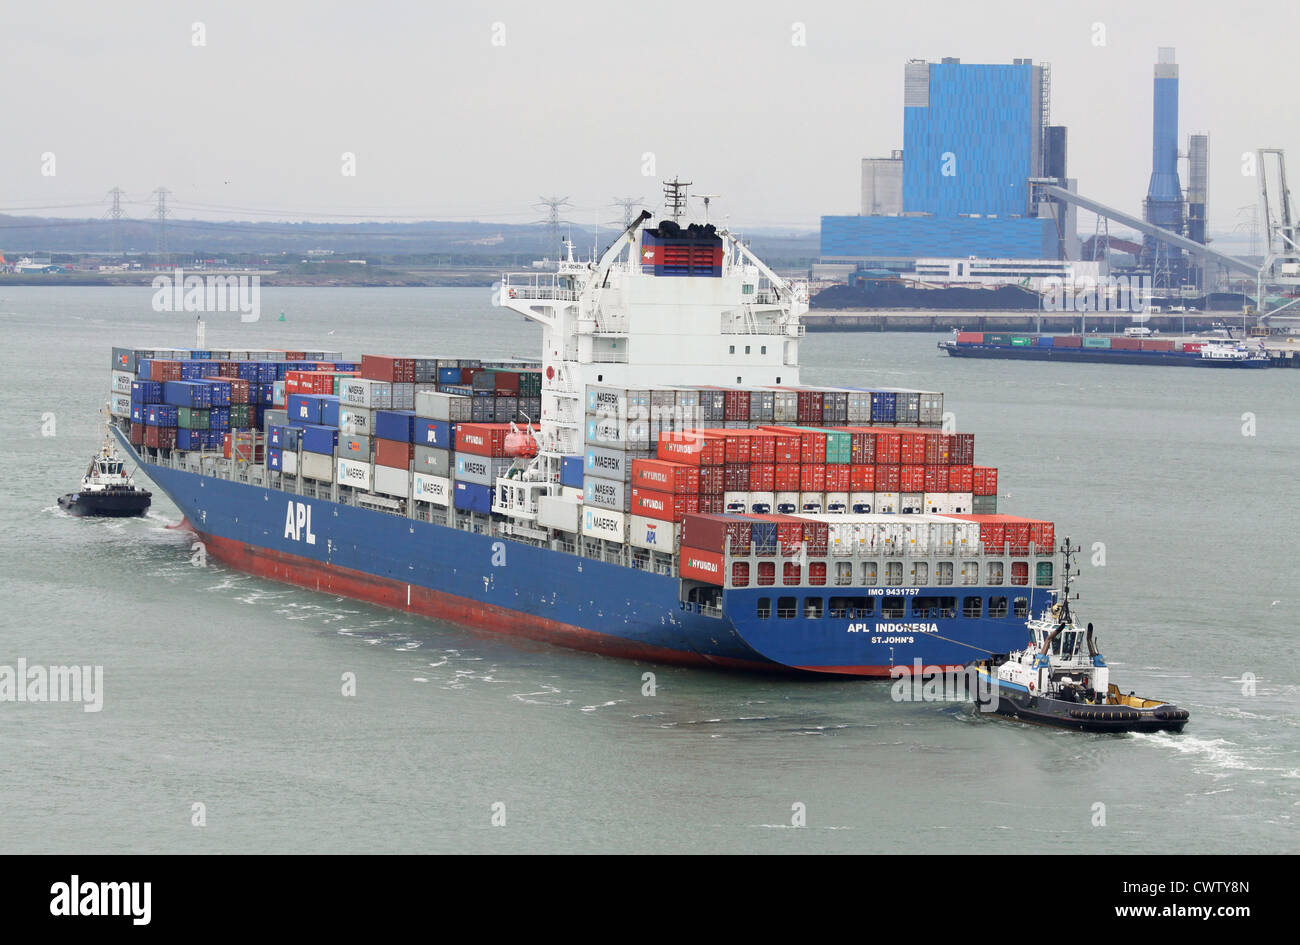 50,246 dwt, 2010-built containership APL Indonesia navigating in the Port of Rotterdam with tug assistance Stock Photo